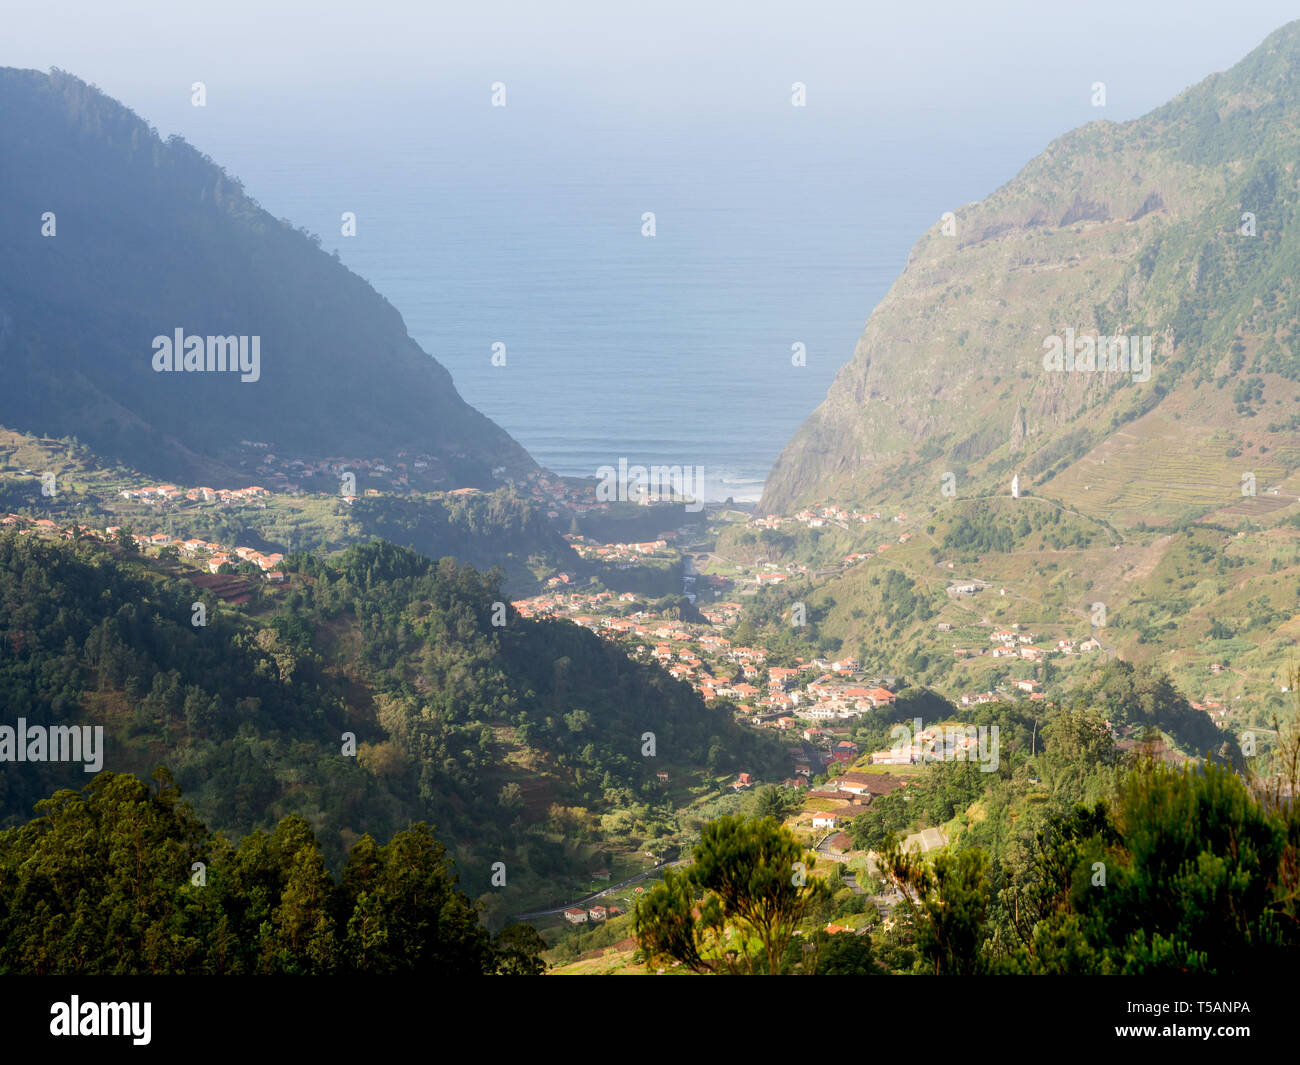 View of a valley in Madeira island, Portugal, with the Atlantic Ocean in the background. Stock Photo